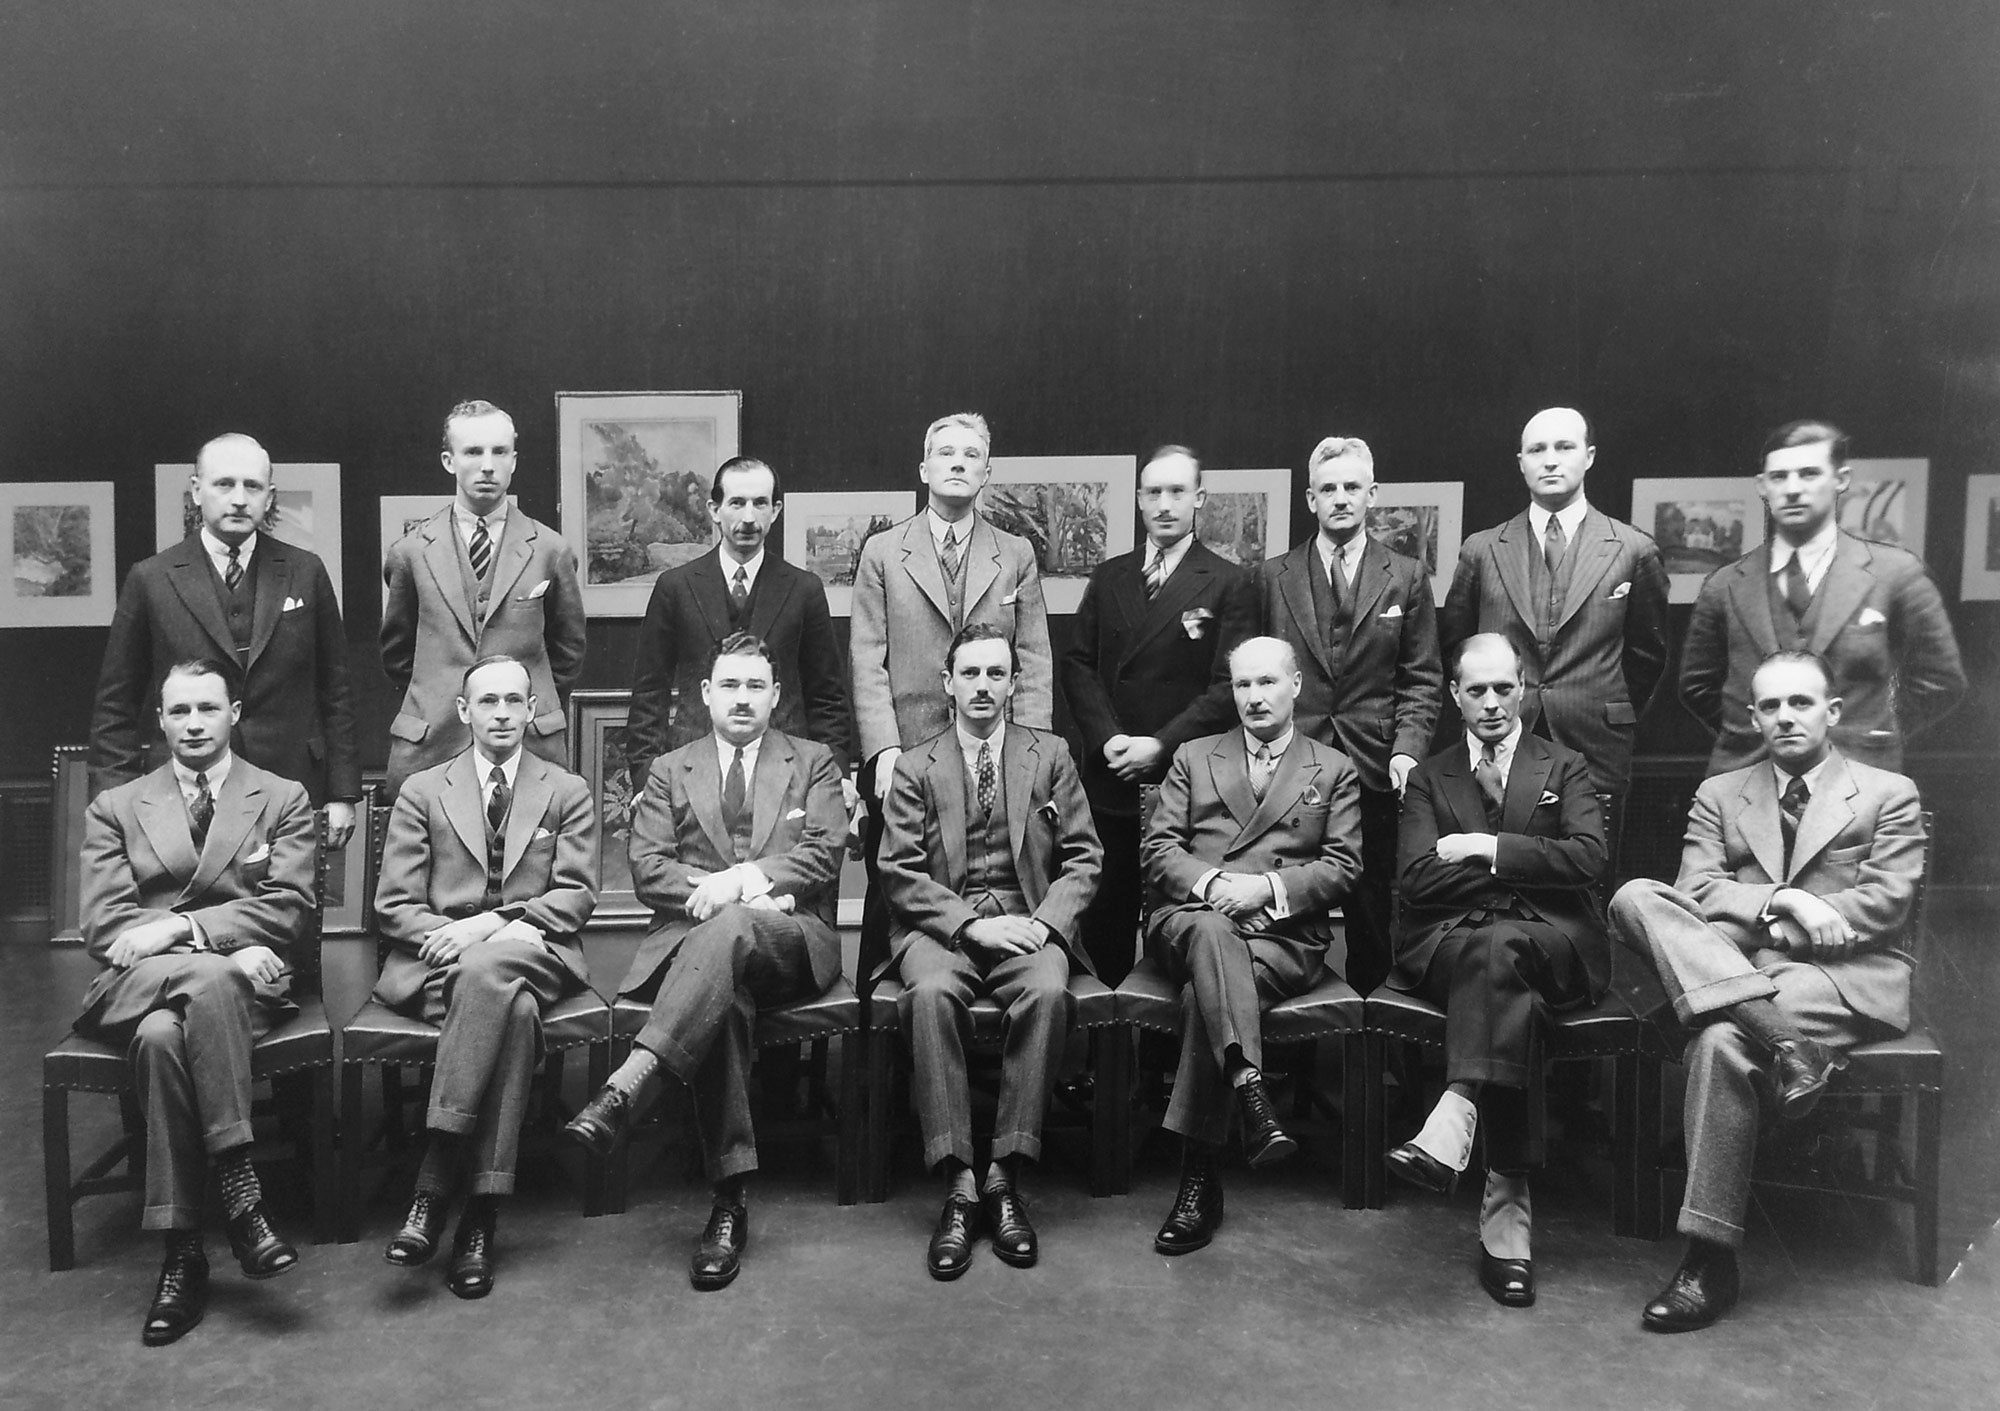 A portrait of the Committee in charge of the Fourth Biennial Architectural Exhibition of the Toronto Chapter of the Ontario Association of Architects. (Left to Right) Burwell R. Coon, Jack Ryrie, R.W. Catto, H.F. Secord, F.H. Wilkes, D.E. Kertland, G.R. Gouinlock, Dyce C. Saunders, L.C.M. Baldwin (Curator of Art Gallery), W.L. Somerville, A.S. Mathers (Chairman of Committee), D.M. Waters (Chairman of the Toronto Chapter of the Ontario Association of Architects), J.M. Lyle, Murray Brown and E.R. Arthurs.